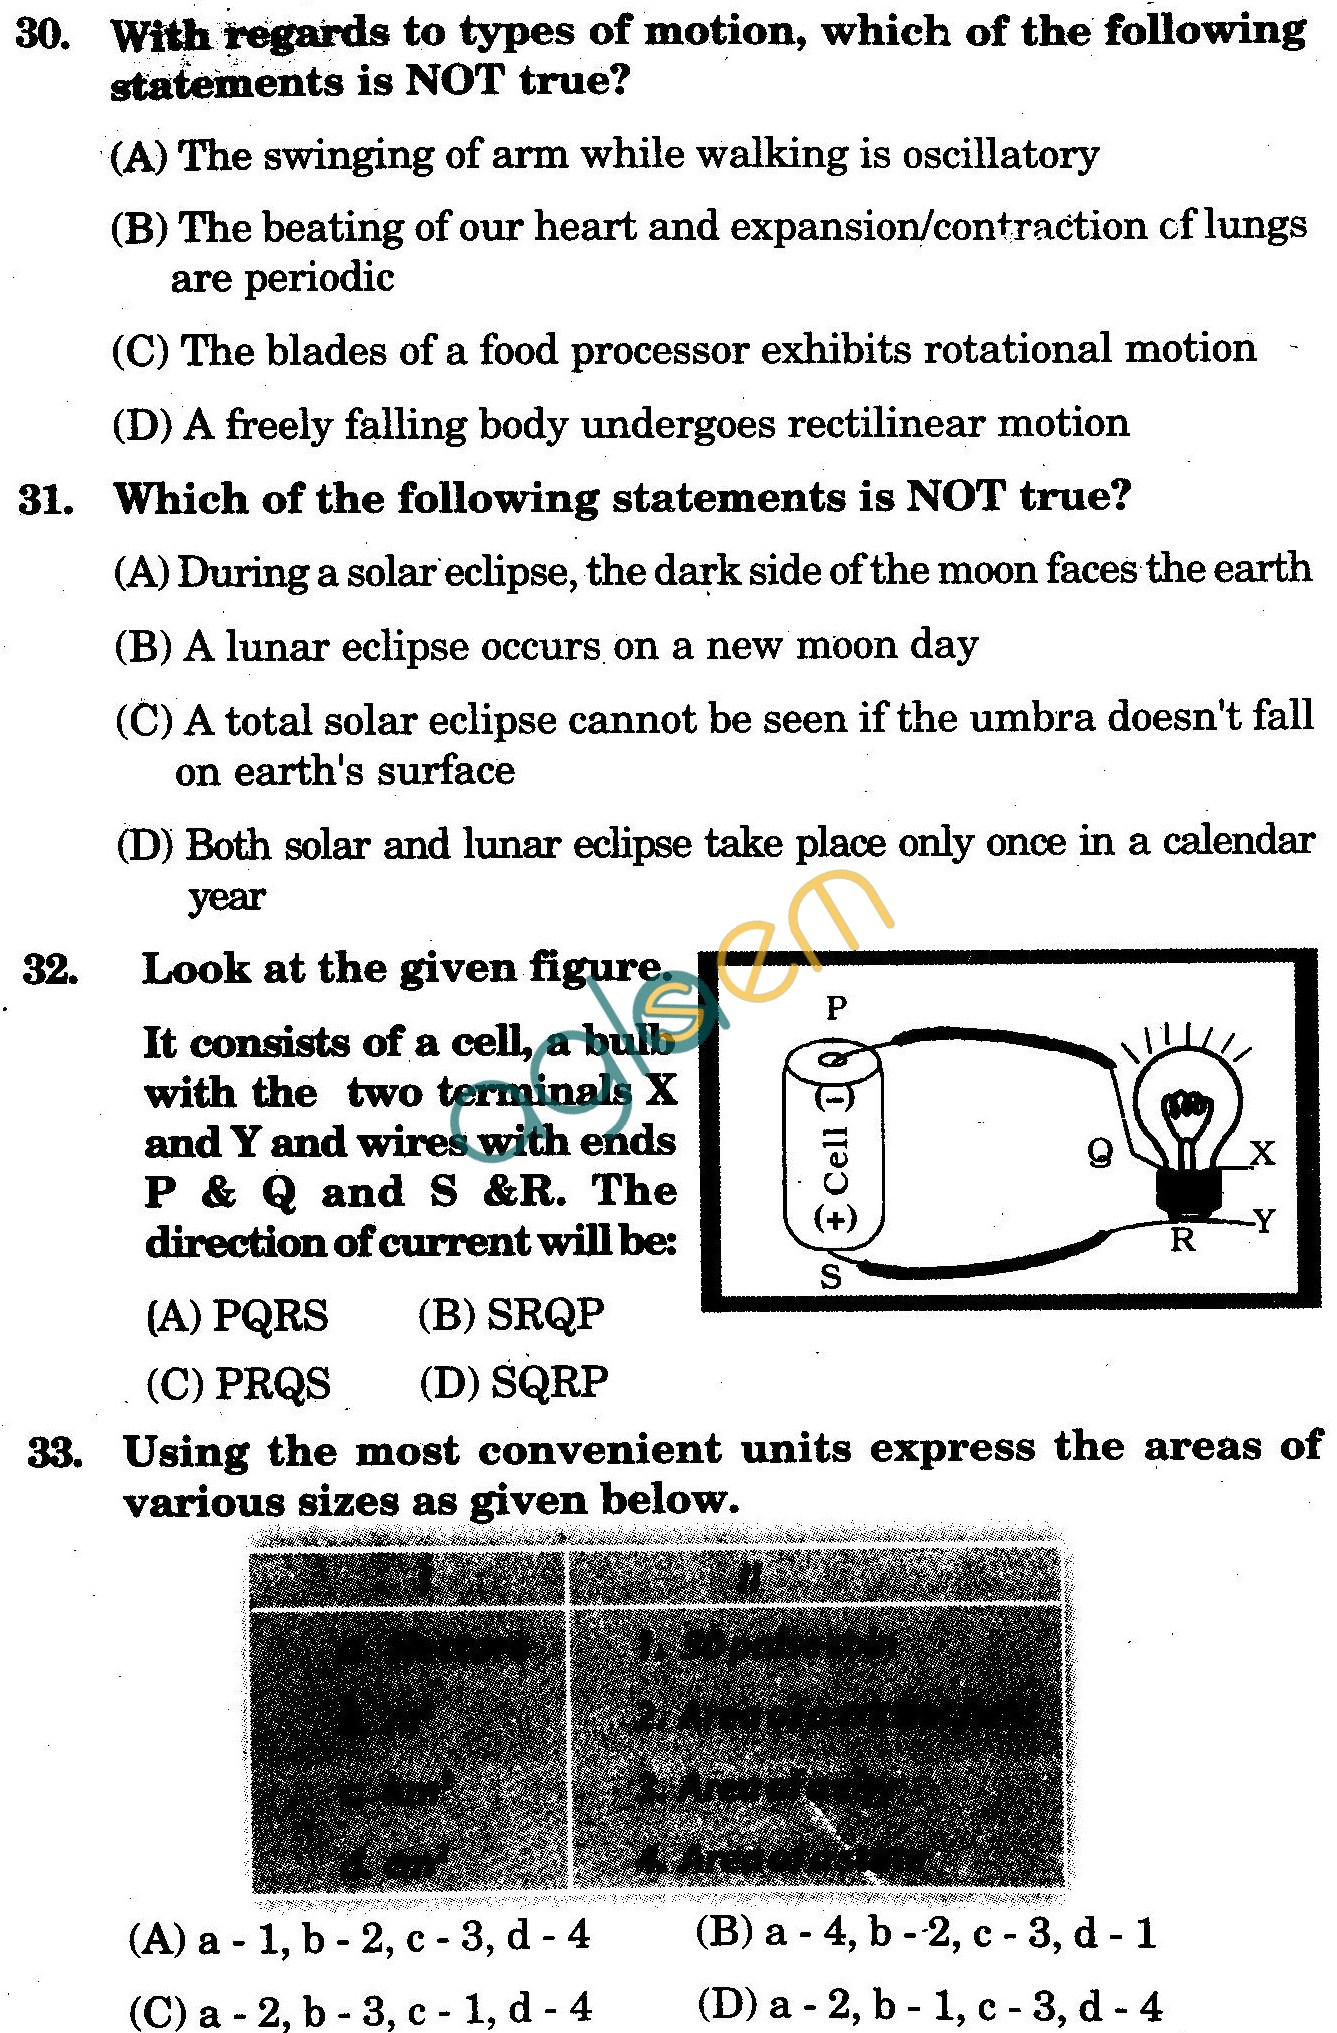 NSTSE 2009 Class VI Question Paper with Answers - Physics